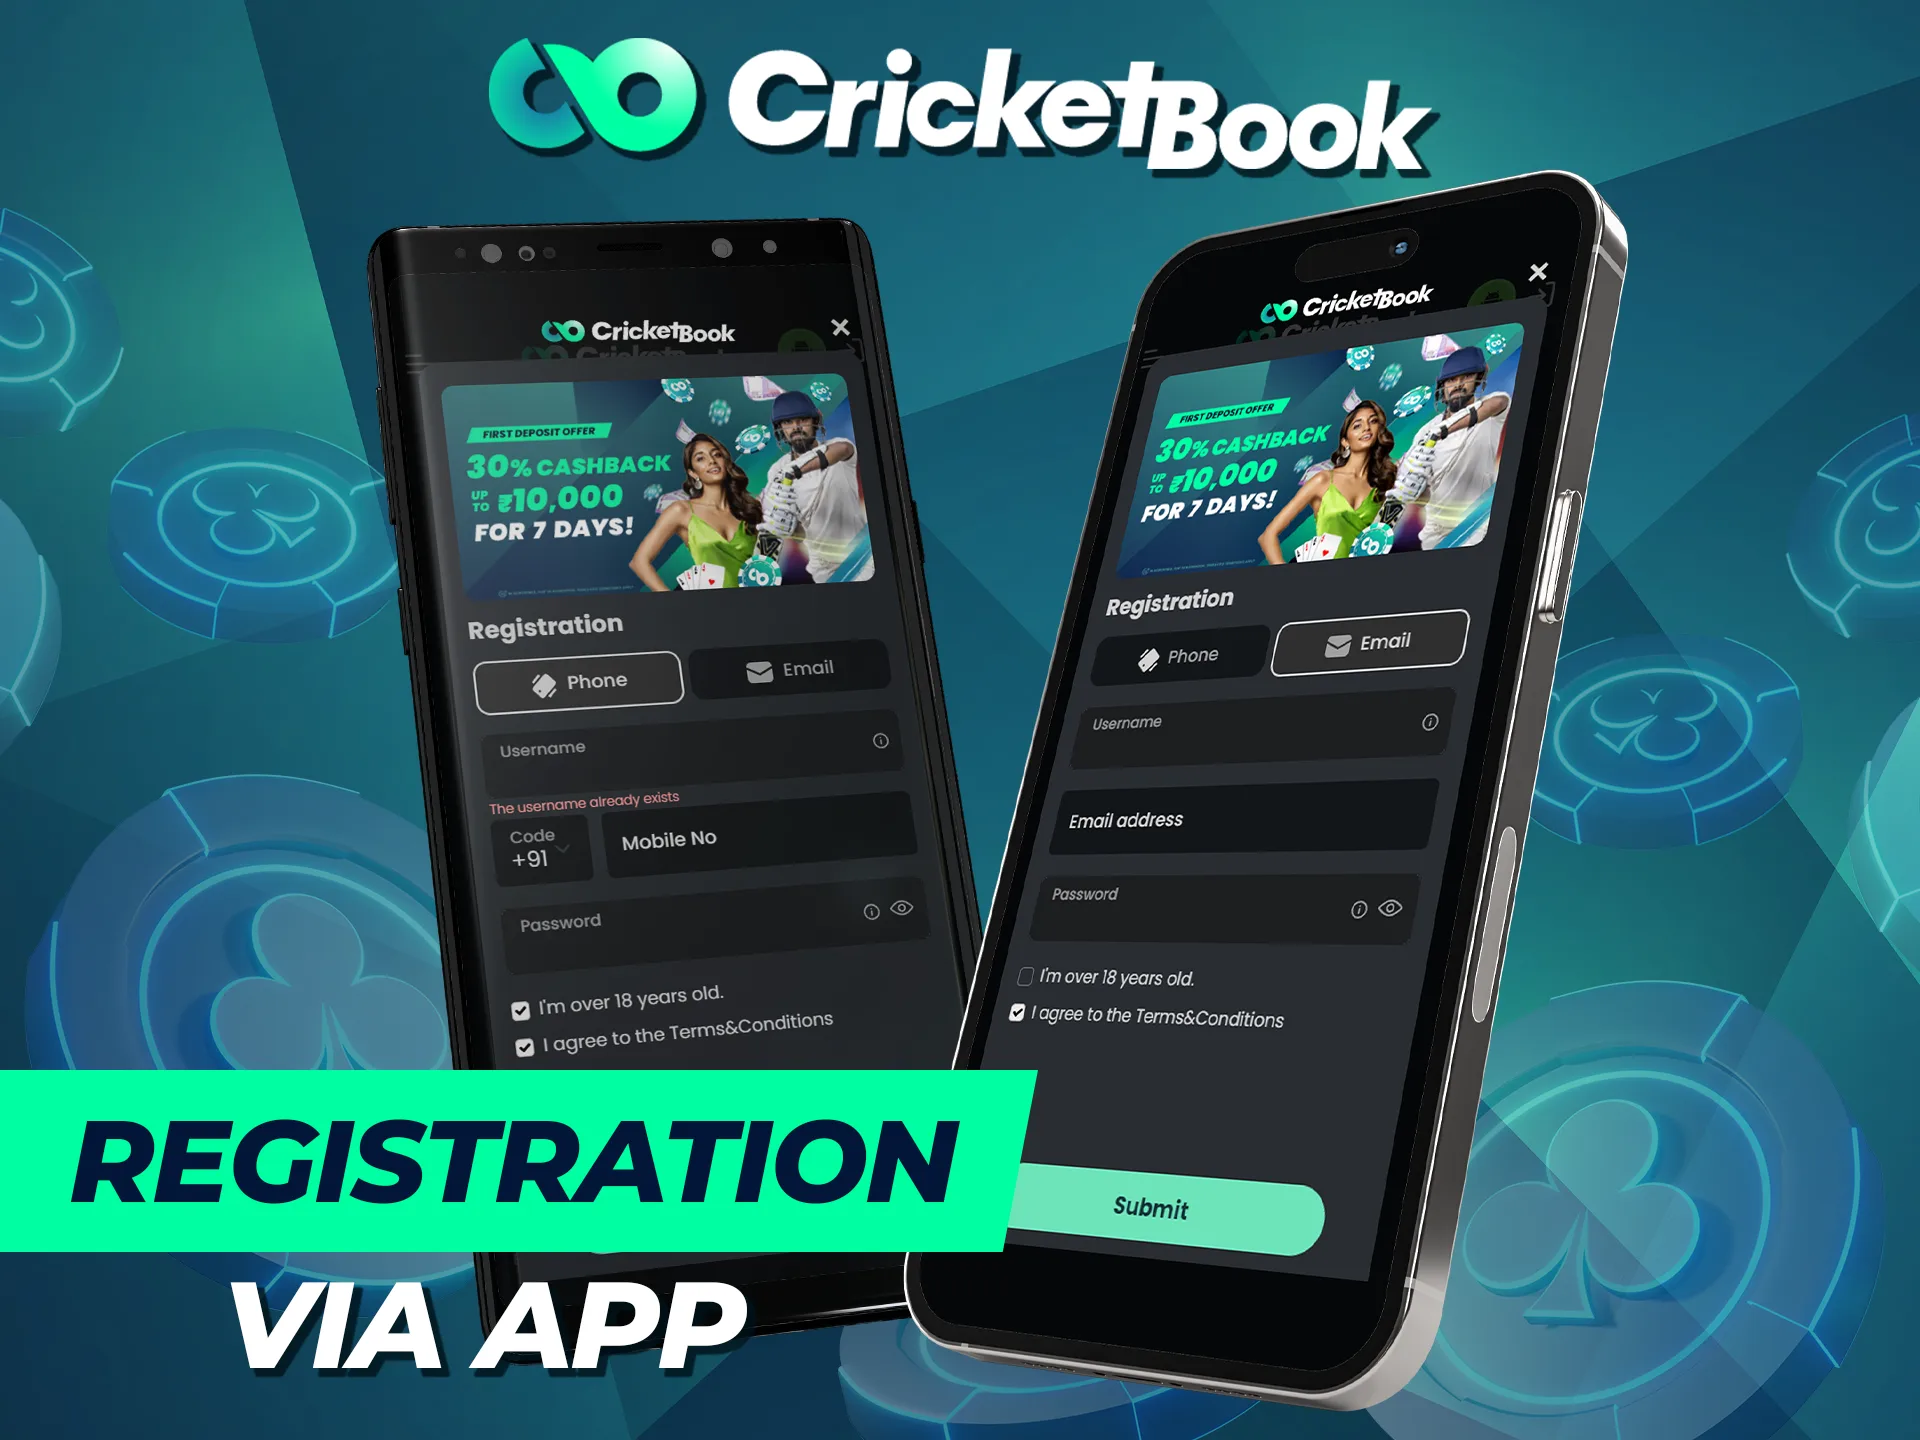 Registration through the Cricketbook app is available for Android and iOS devices.